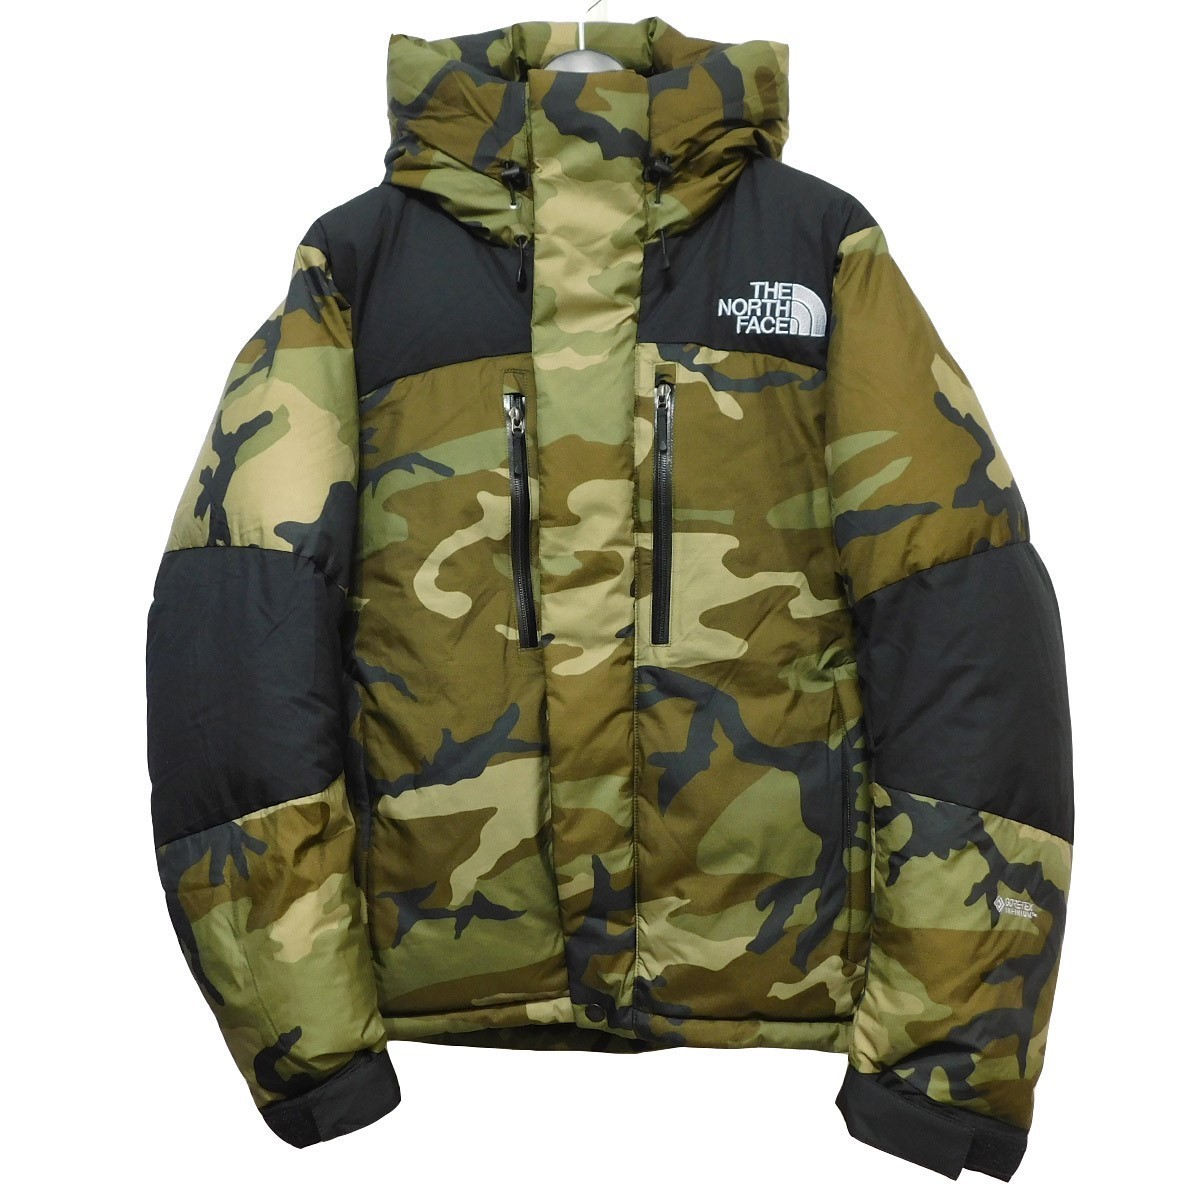 THE NORTH FACE Novelty Baltro Light Jacket バルトロライトジャケット 8071000066558